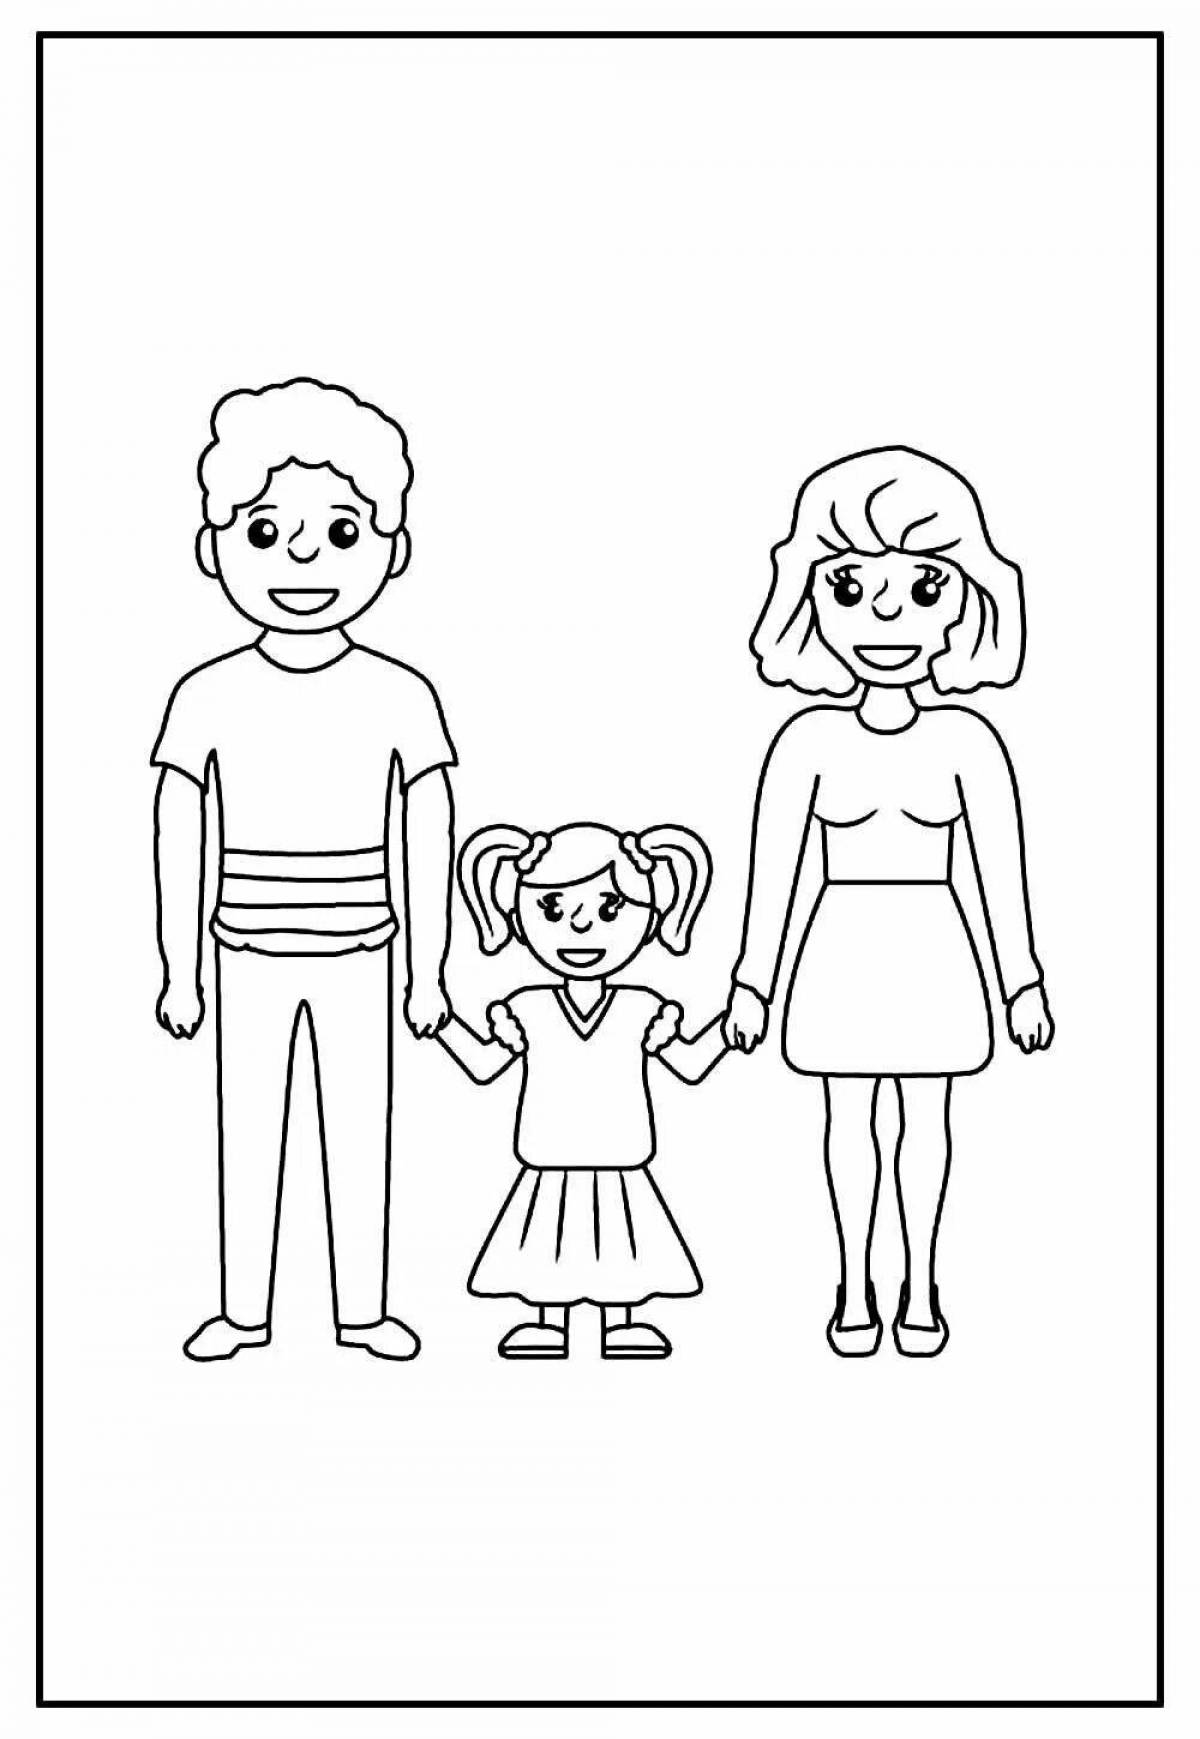 Adorable family coloring book for 4-5 year olds